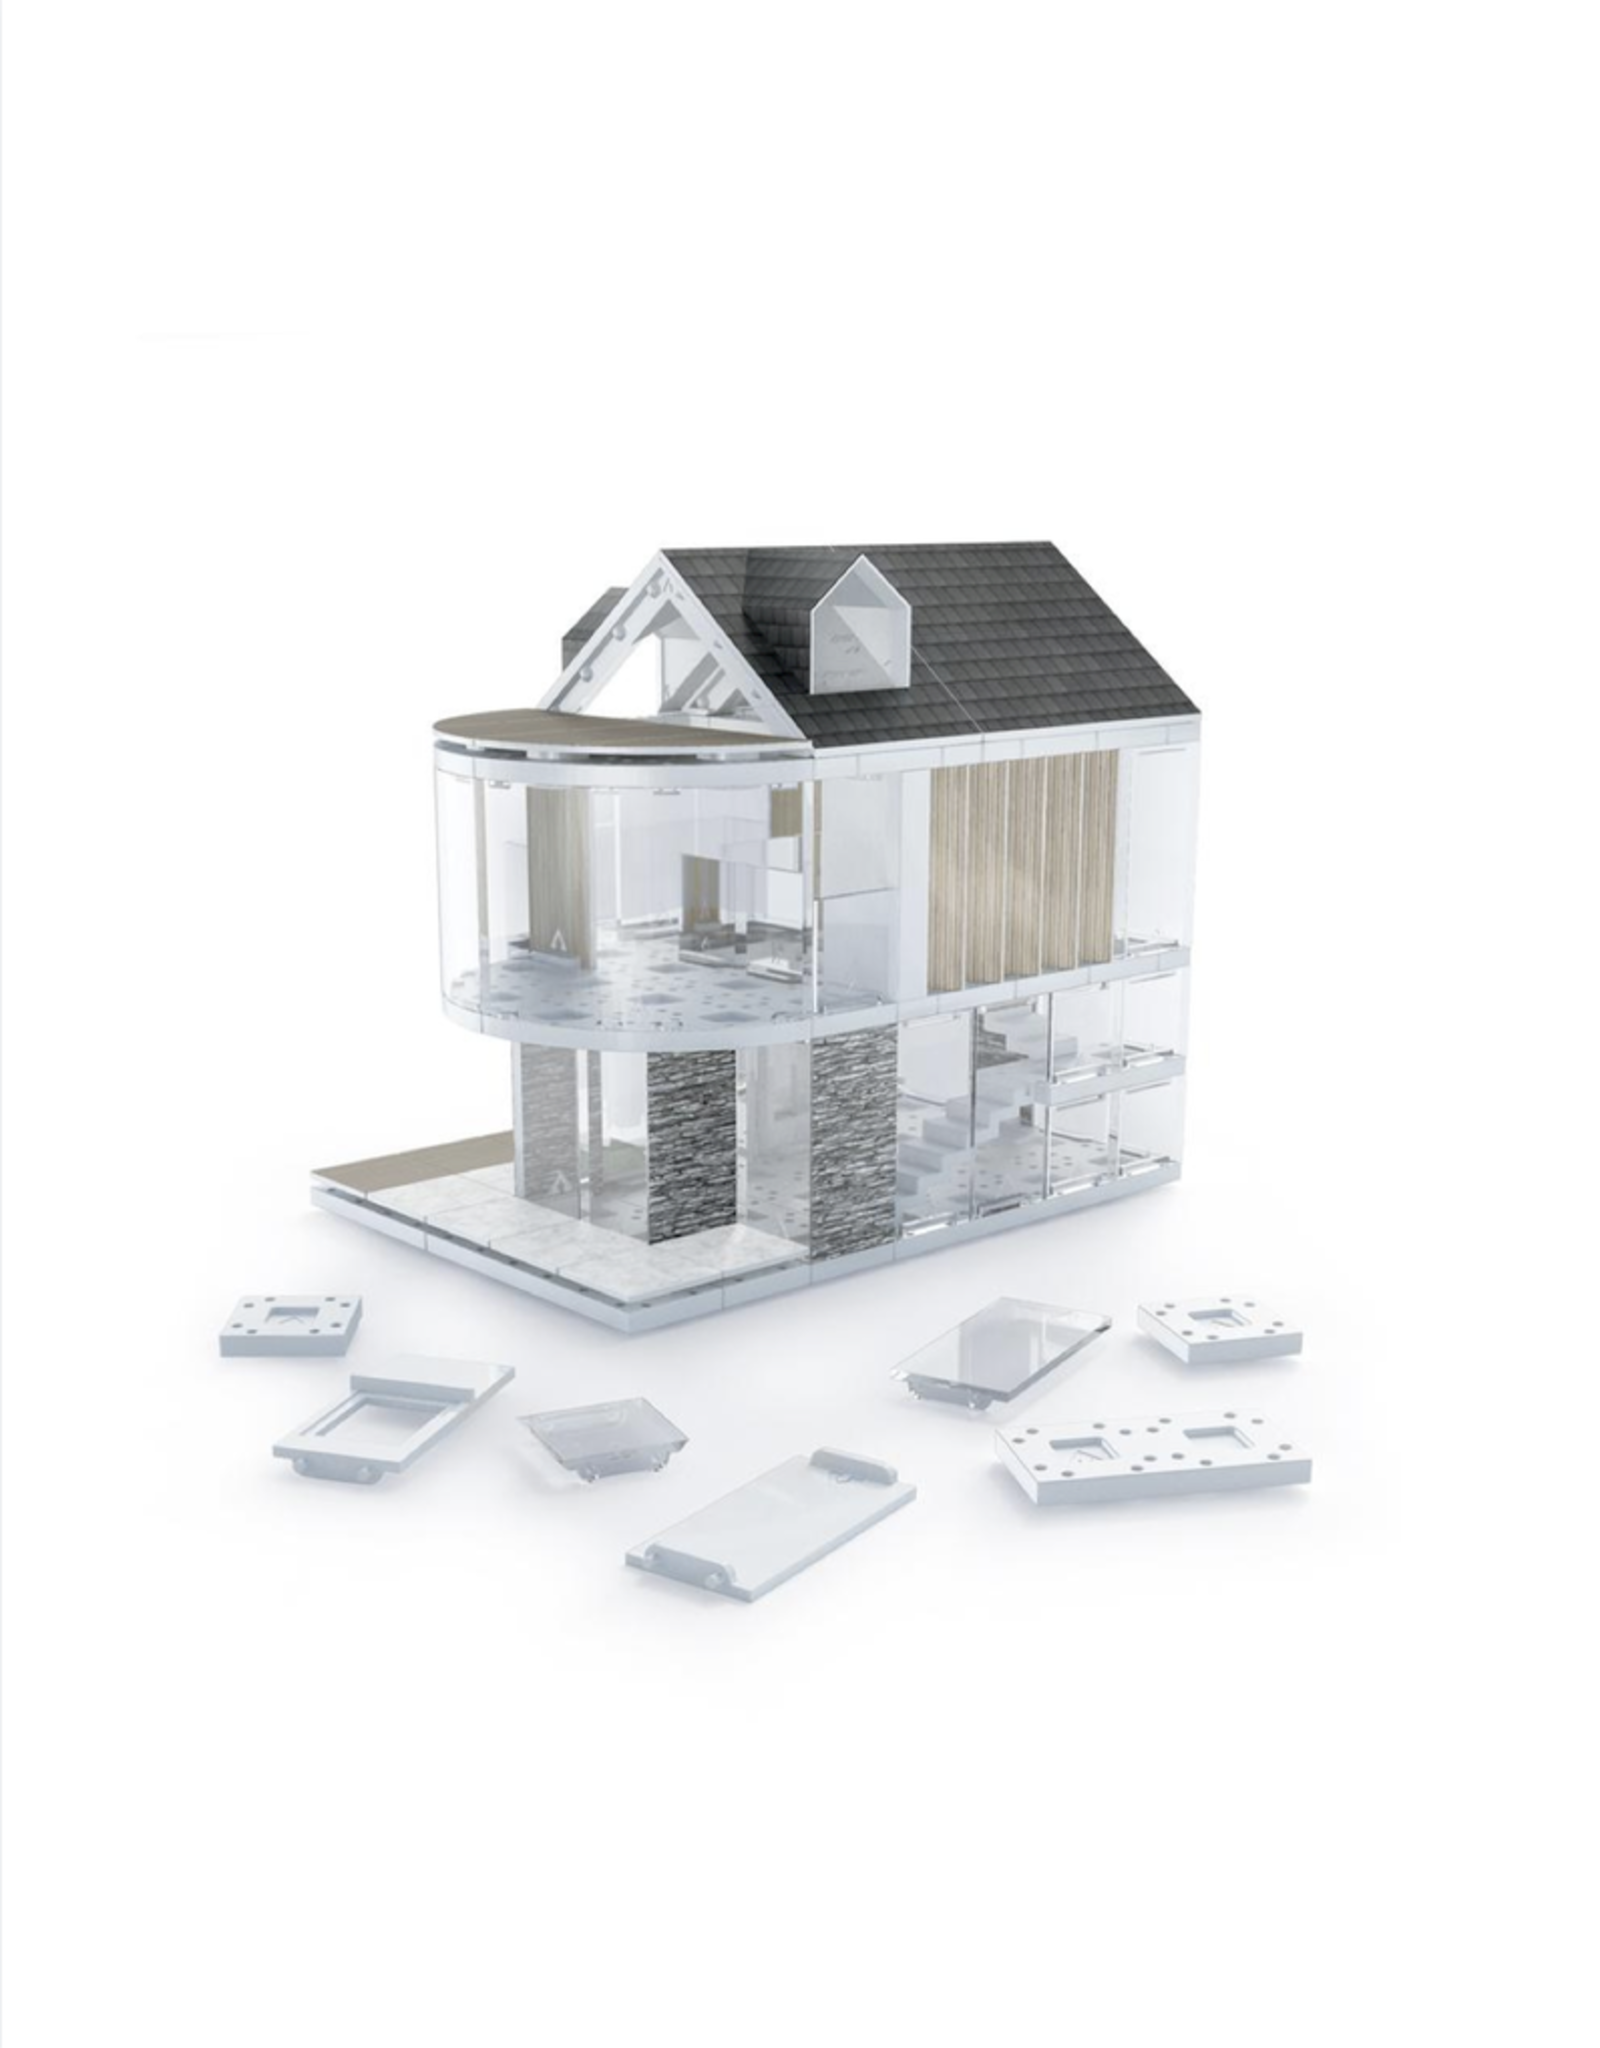 90 Scale Model Architectural Kit